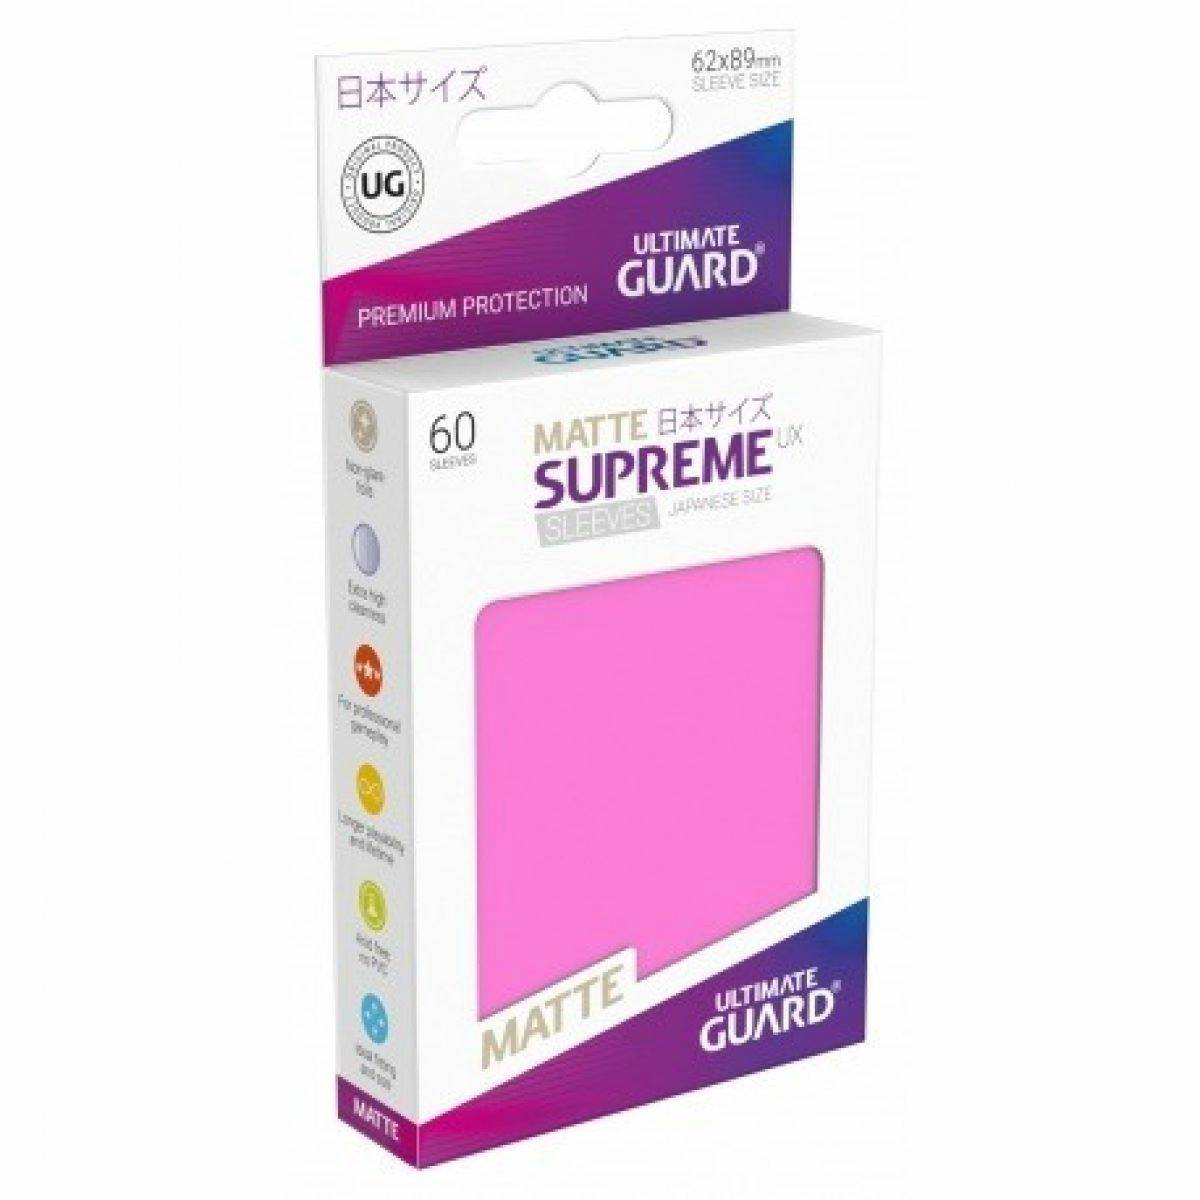 Ultimate Guard - Supreme UX Japanese Size Sleeves Matte Pink (60)